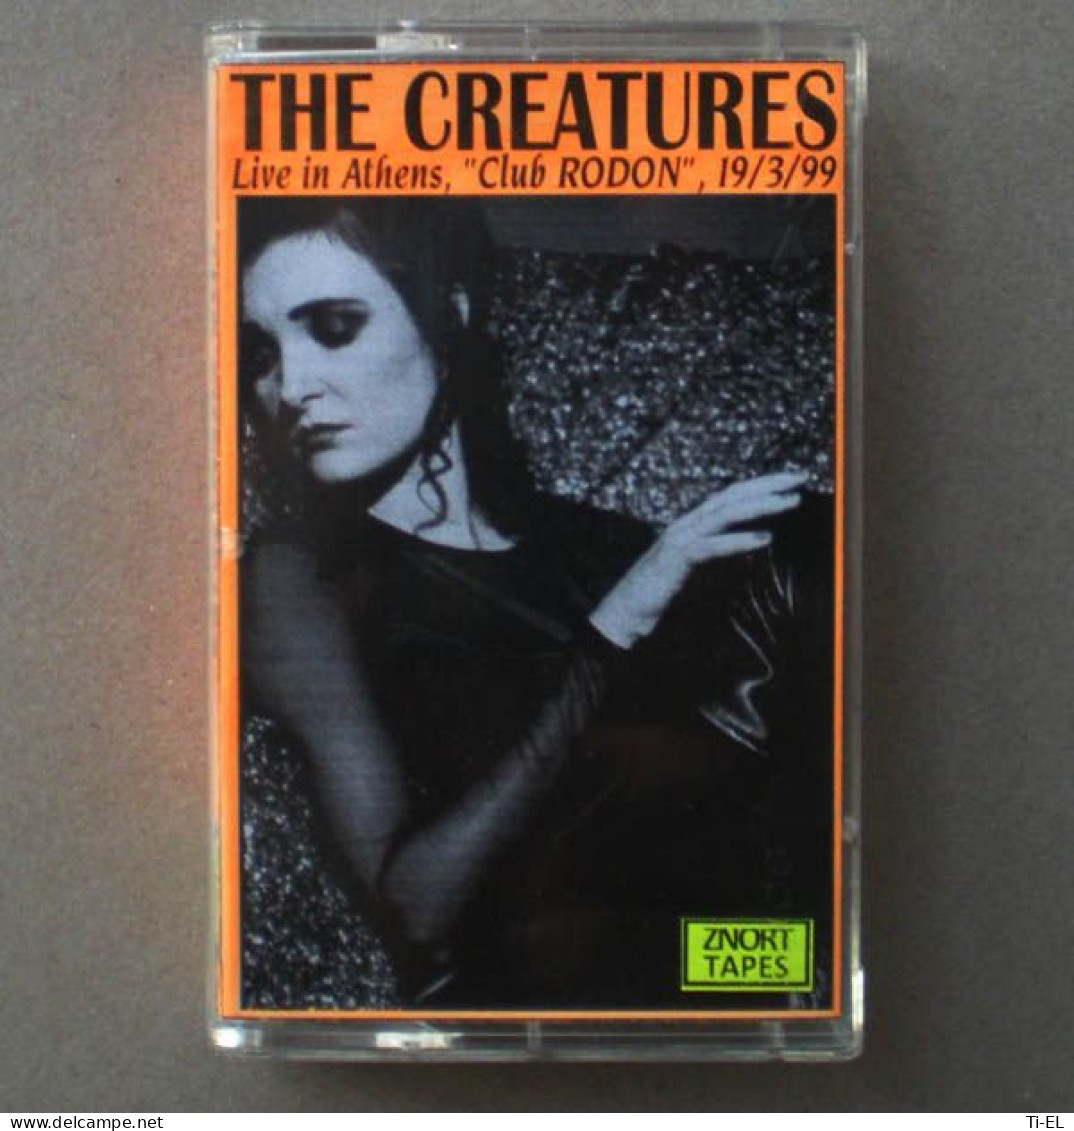 THE CREATURES – Live In Athens, "Club RODON" 19/3/1999 | Rare Audio Tape - Audiocassette